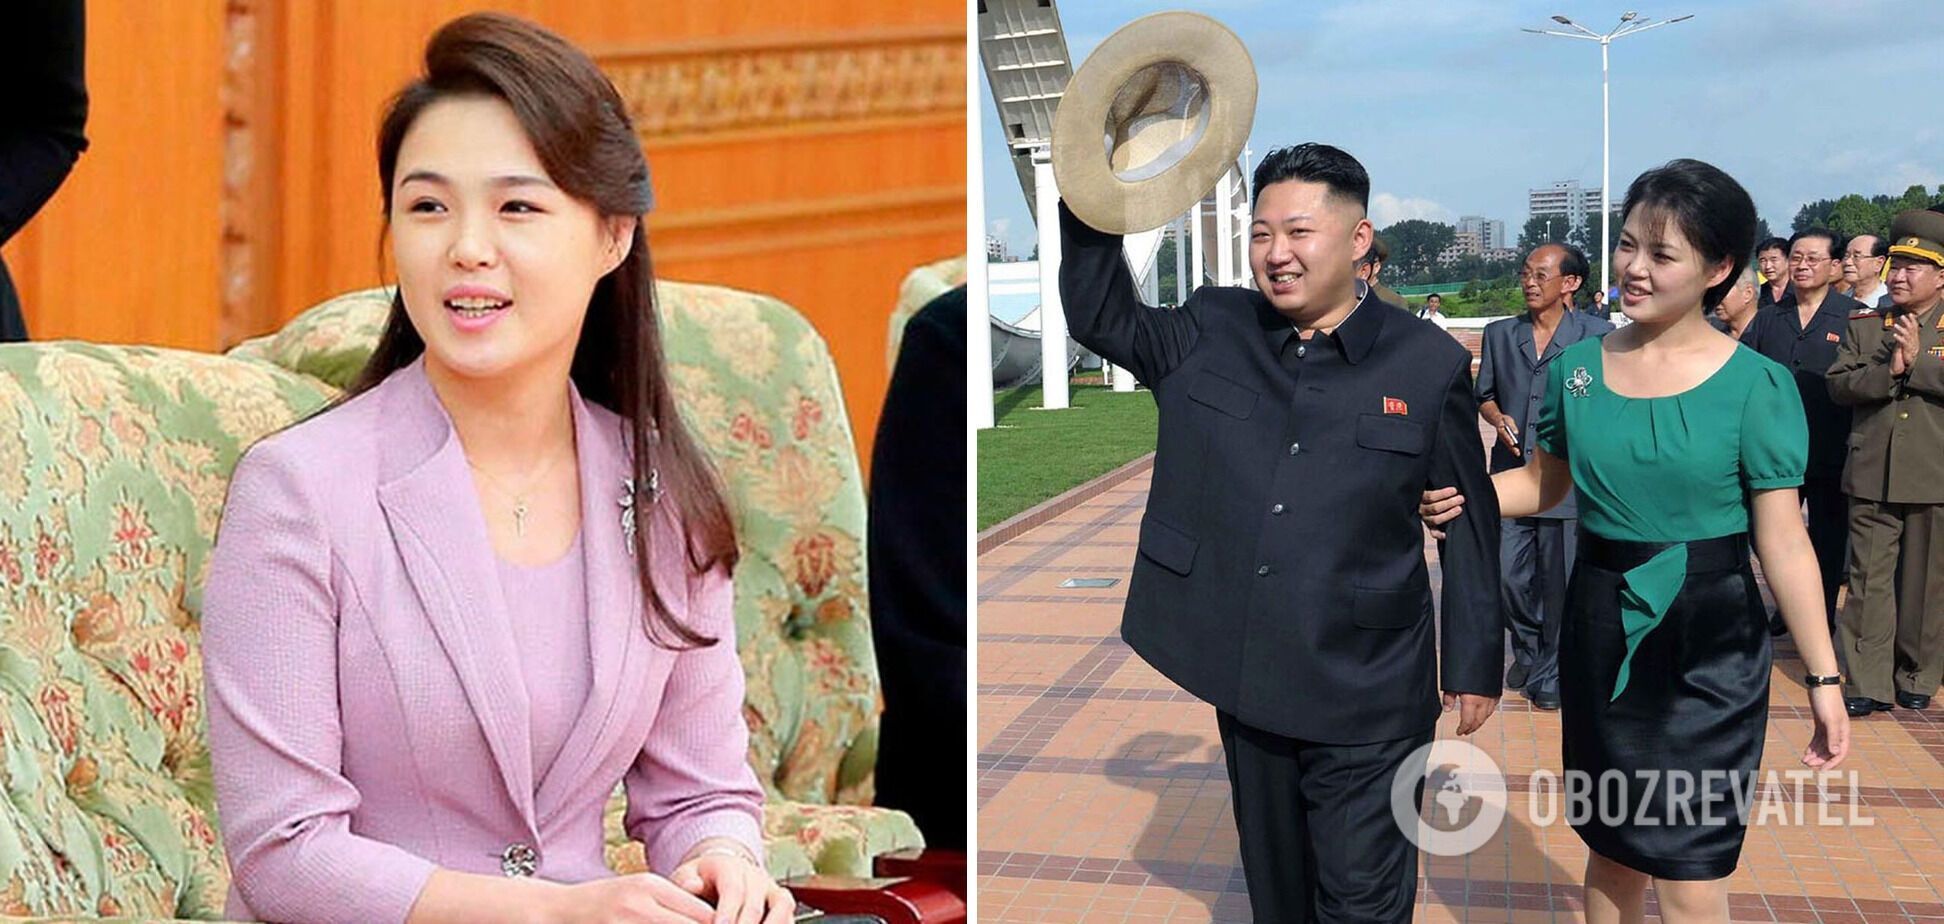 Lee Sol-ju is the First Lady of the DPRK.